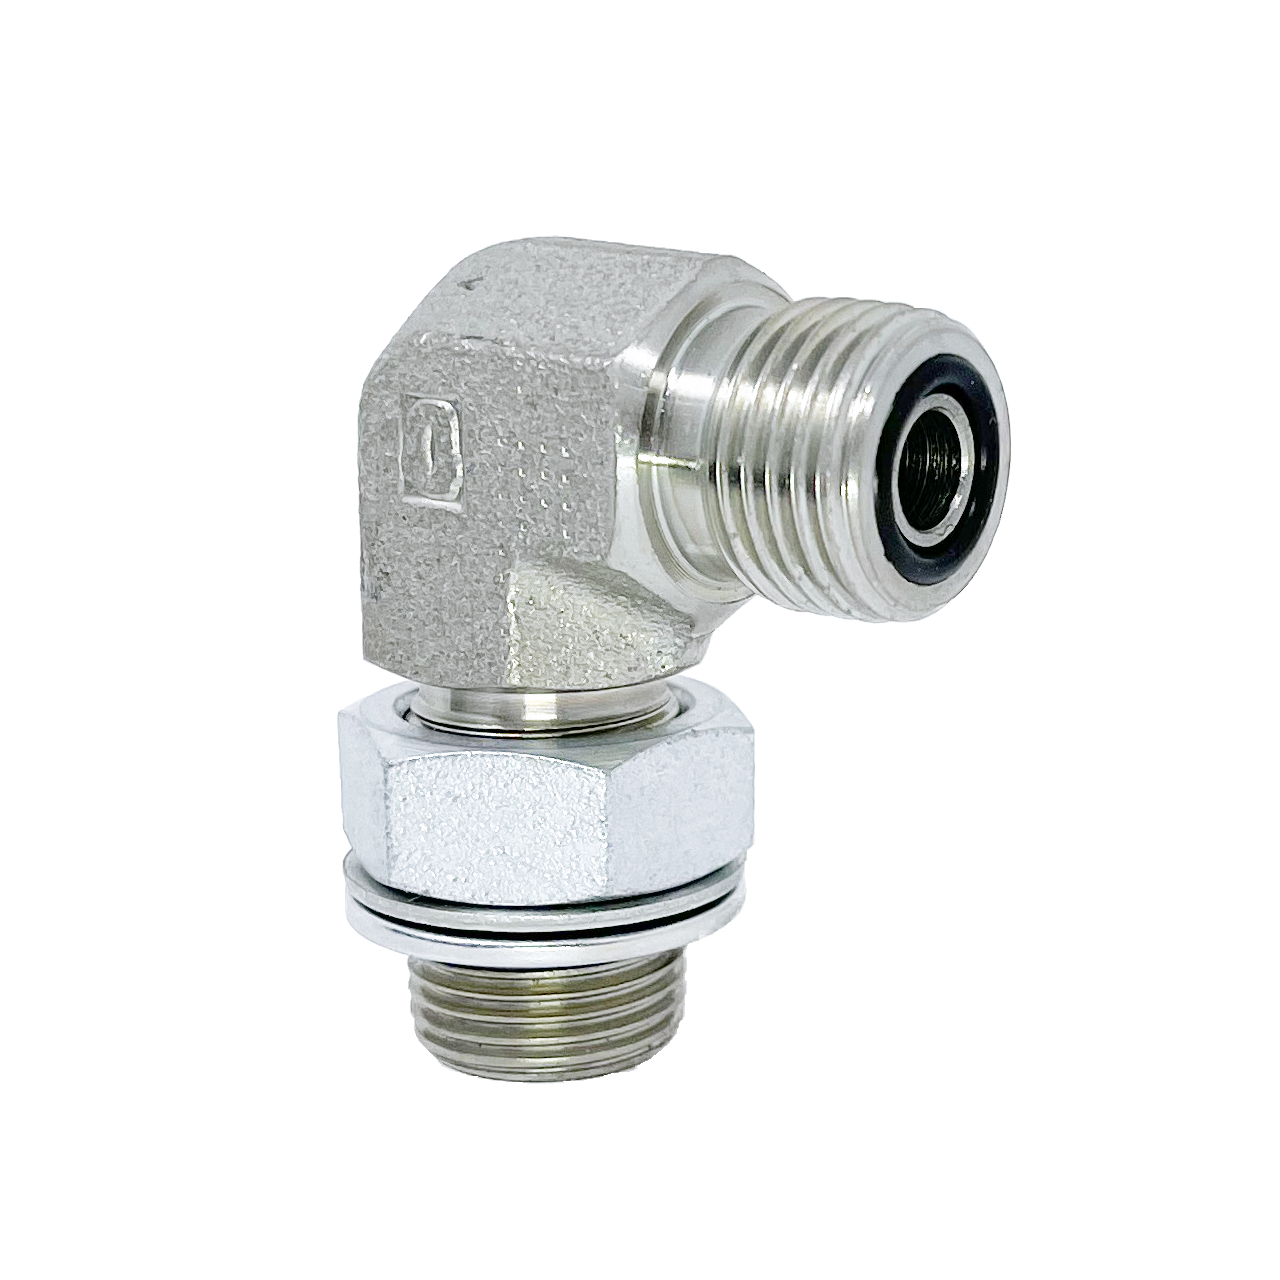 6058-06-06 : Adaptall 45-Degree Adapter, Male 0.375 (3/8") ORFS x Male 0.375 (3/8") BSPP, Carbon Steel